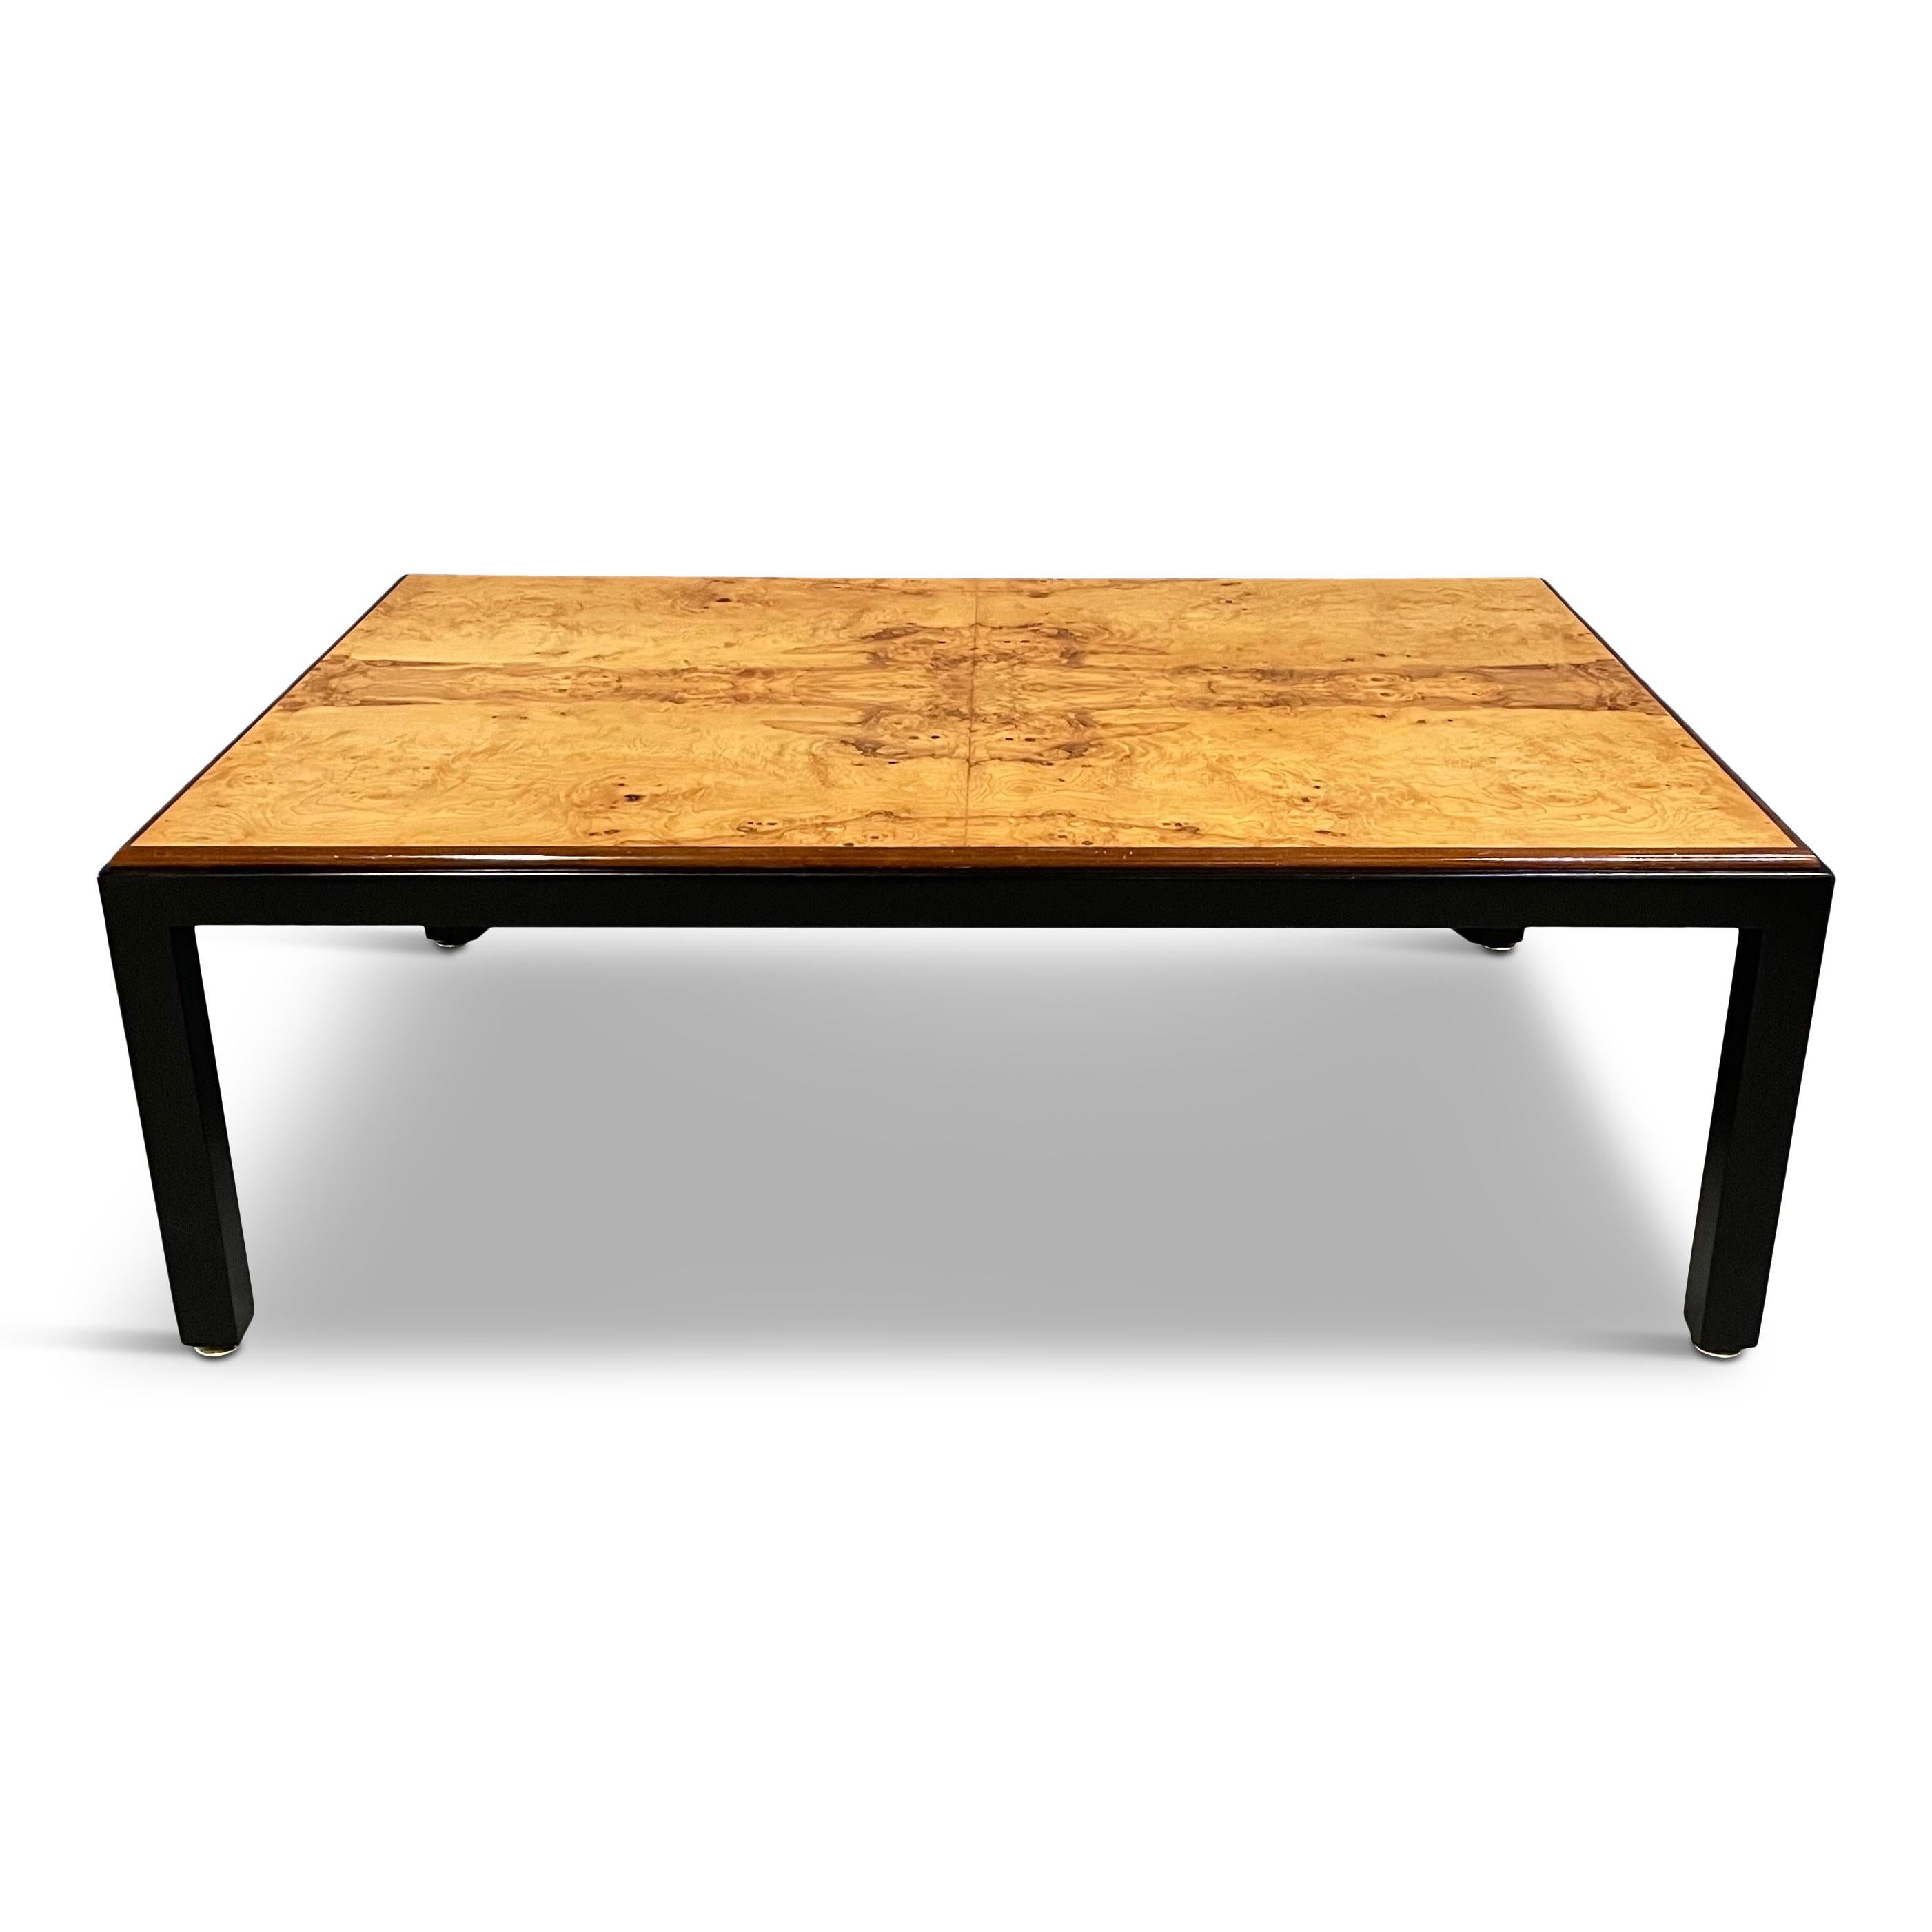 This dynamic, impressively sized coffee table has a beautiful burl top and ebonite frame with brass levelers.